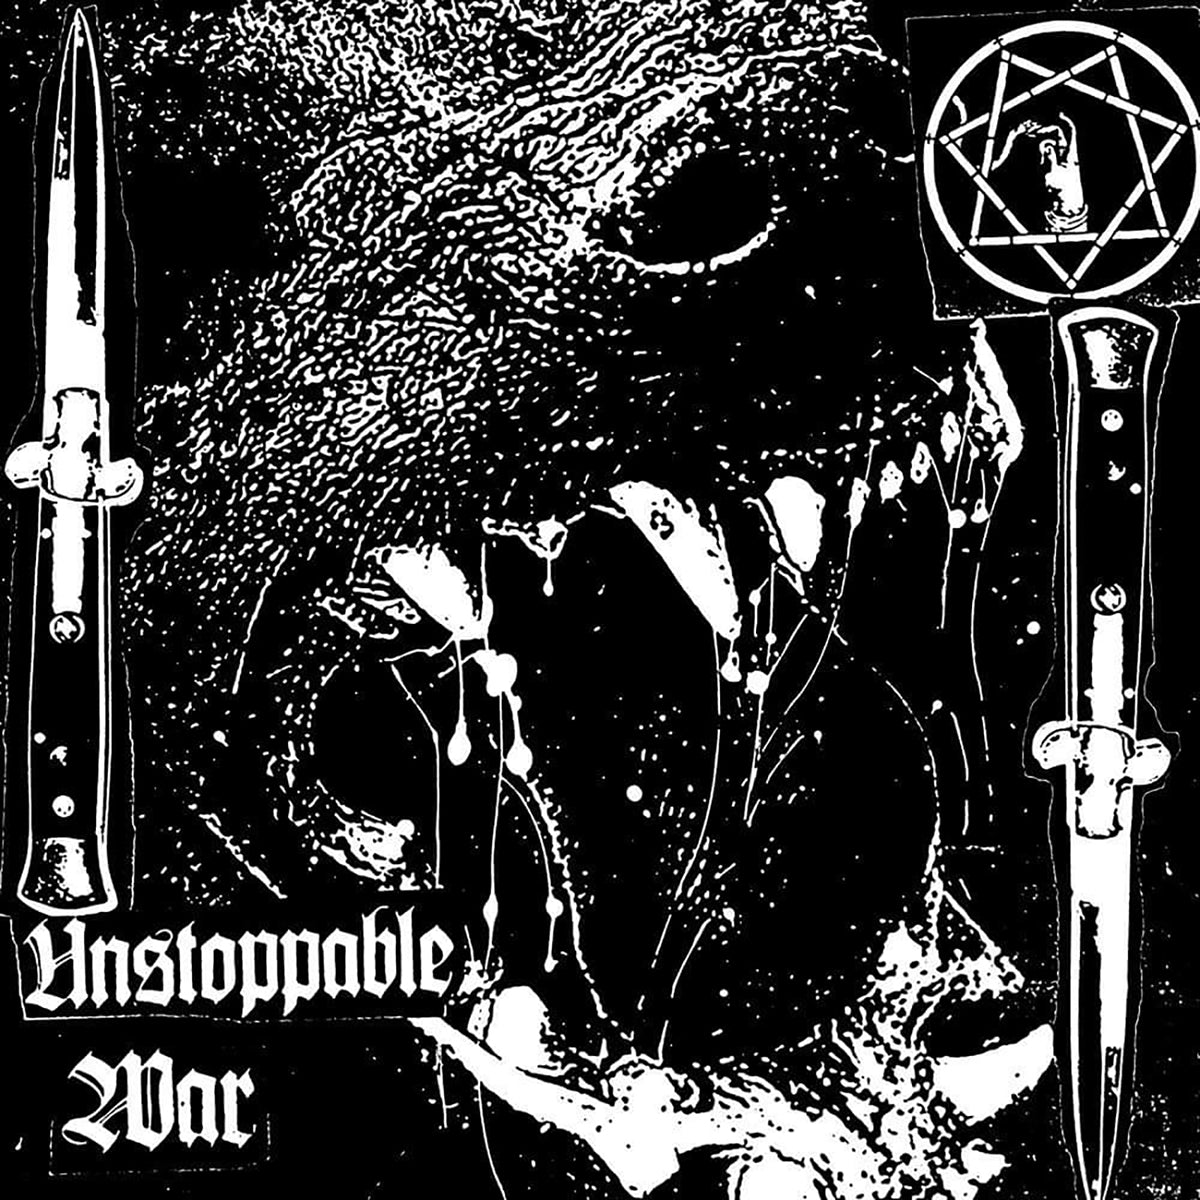 BLIND TO FAITH "Unstoppable War" LP